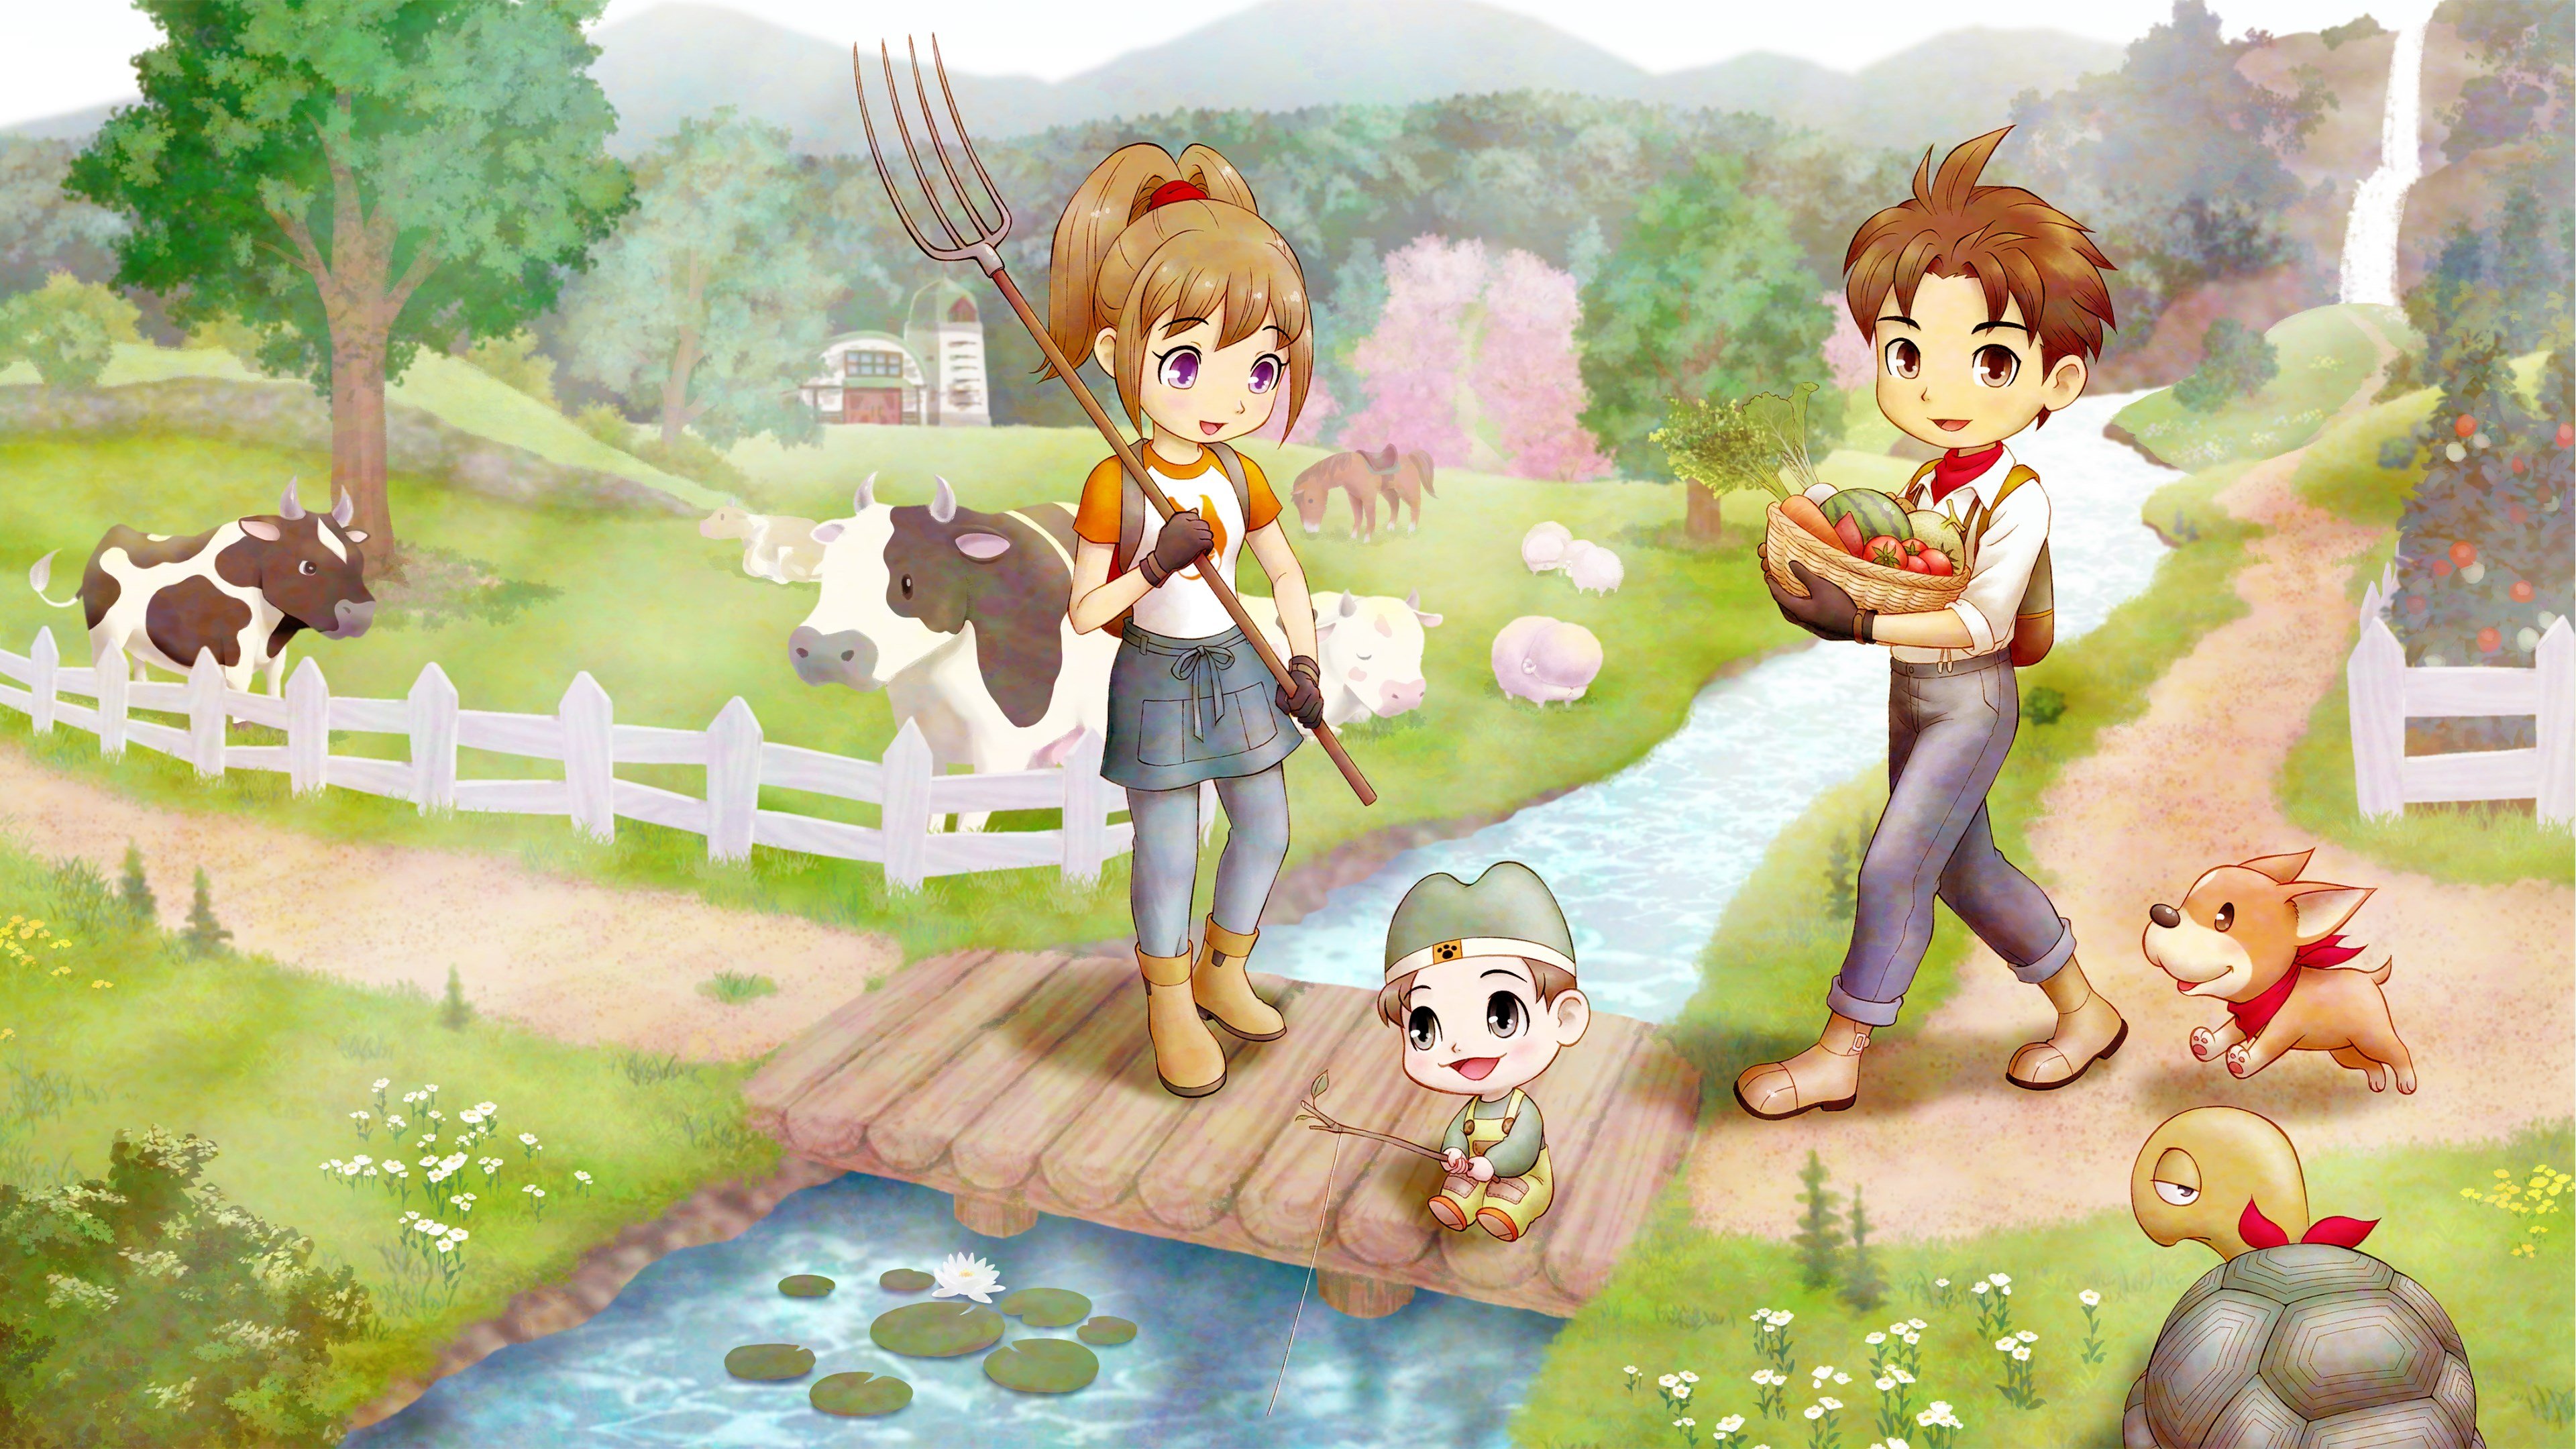 STORY OF SEASONS: A Wonderful Life cover image